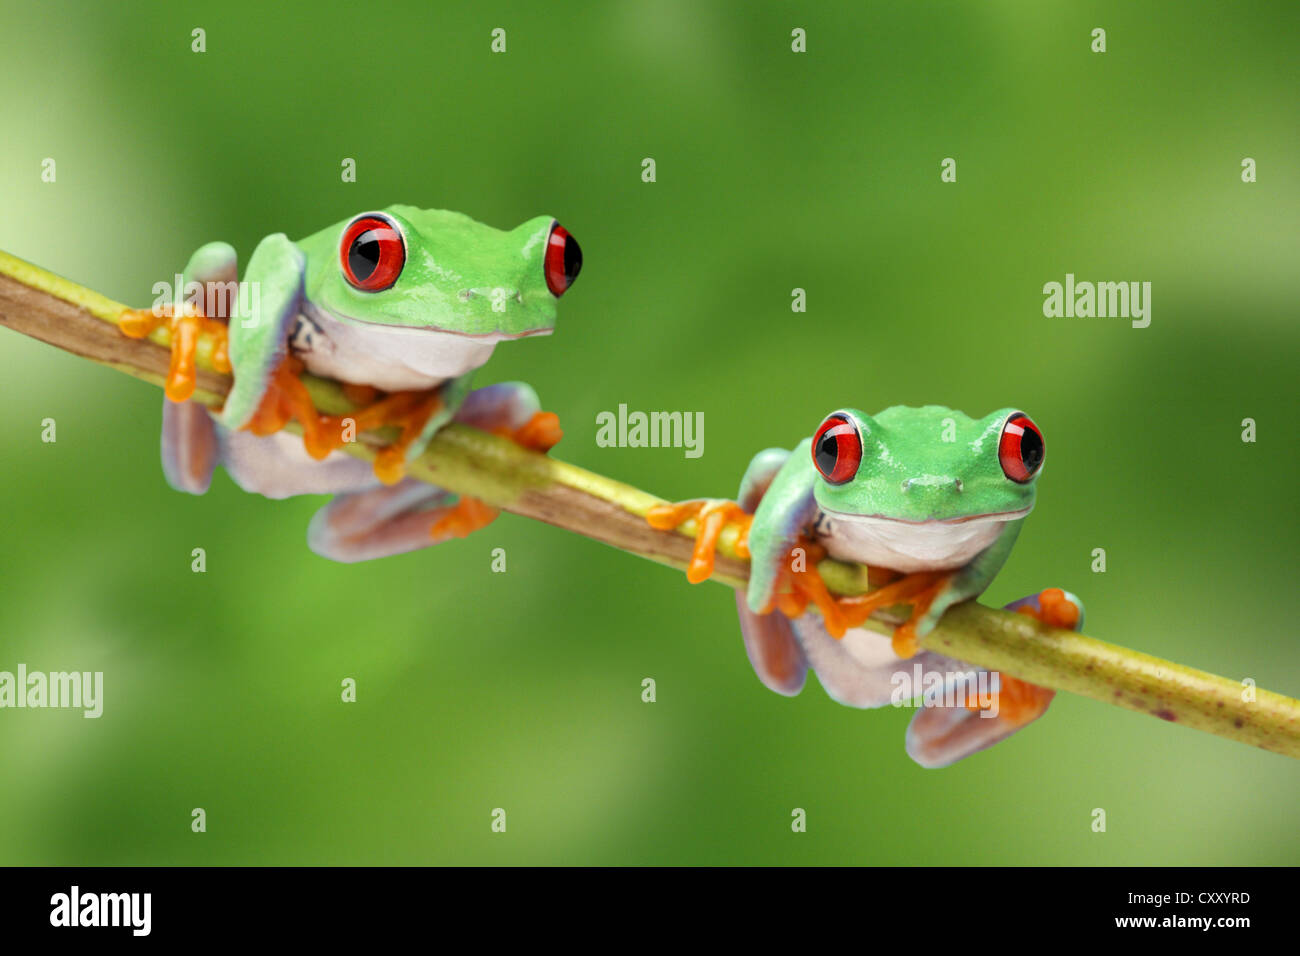 Red-eyed treefrogs (Agalychnis callidryas) sitting on a branch Stock Photo